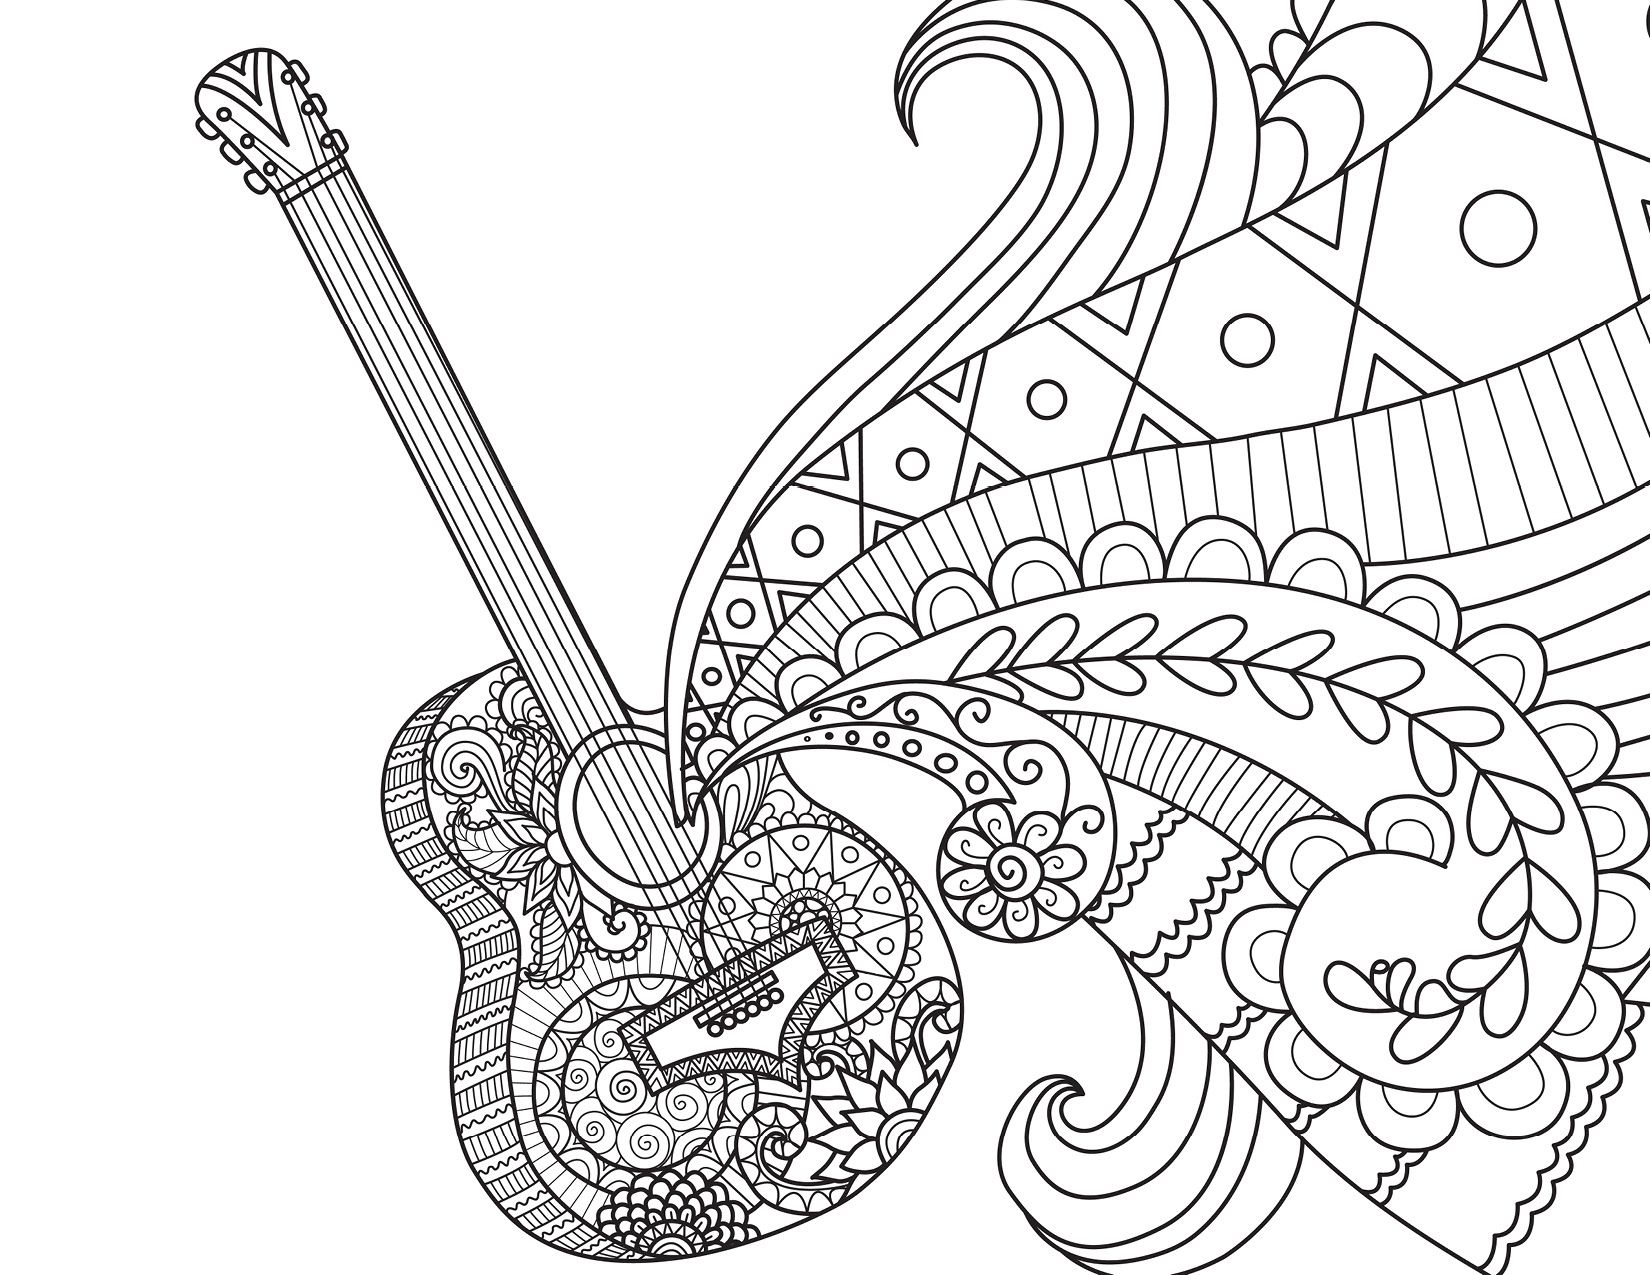 Best 10 Guitar Coloring Pages for Adults - Best Coloring Page Ideas and